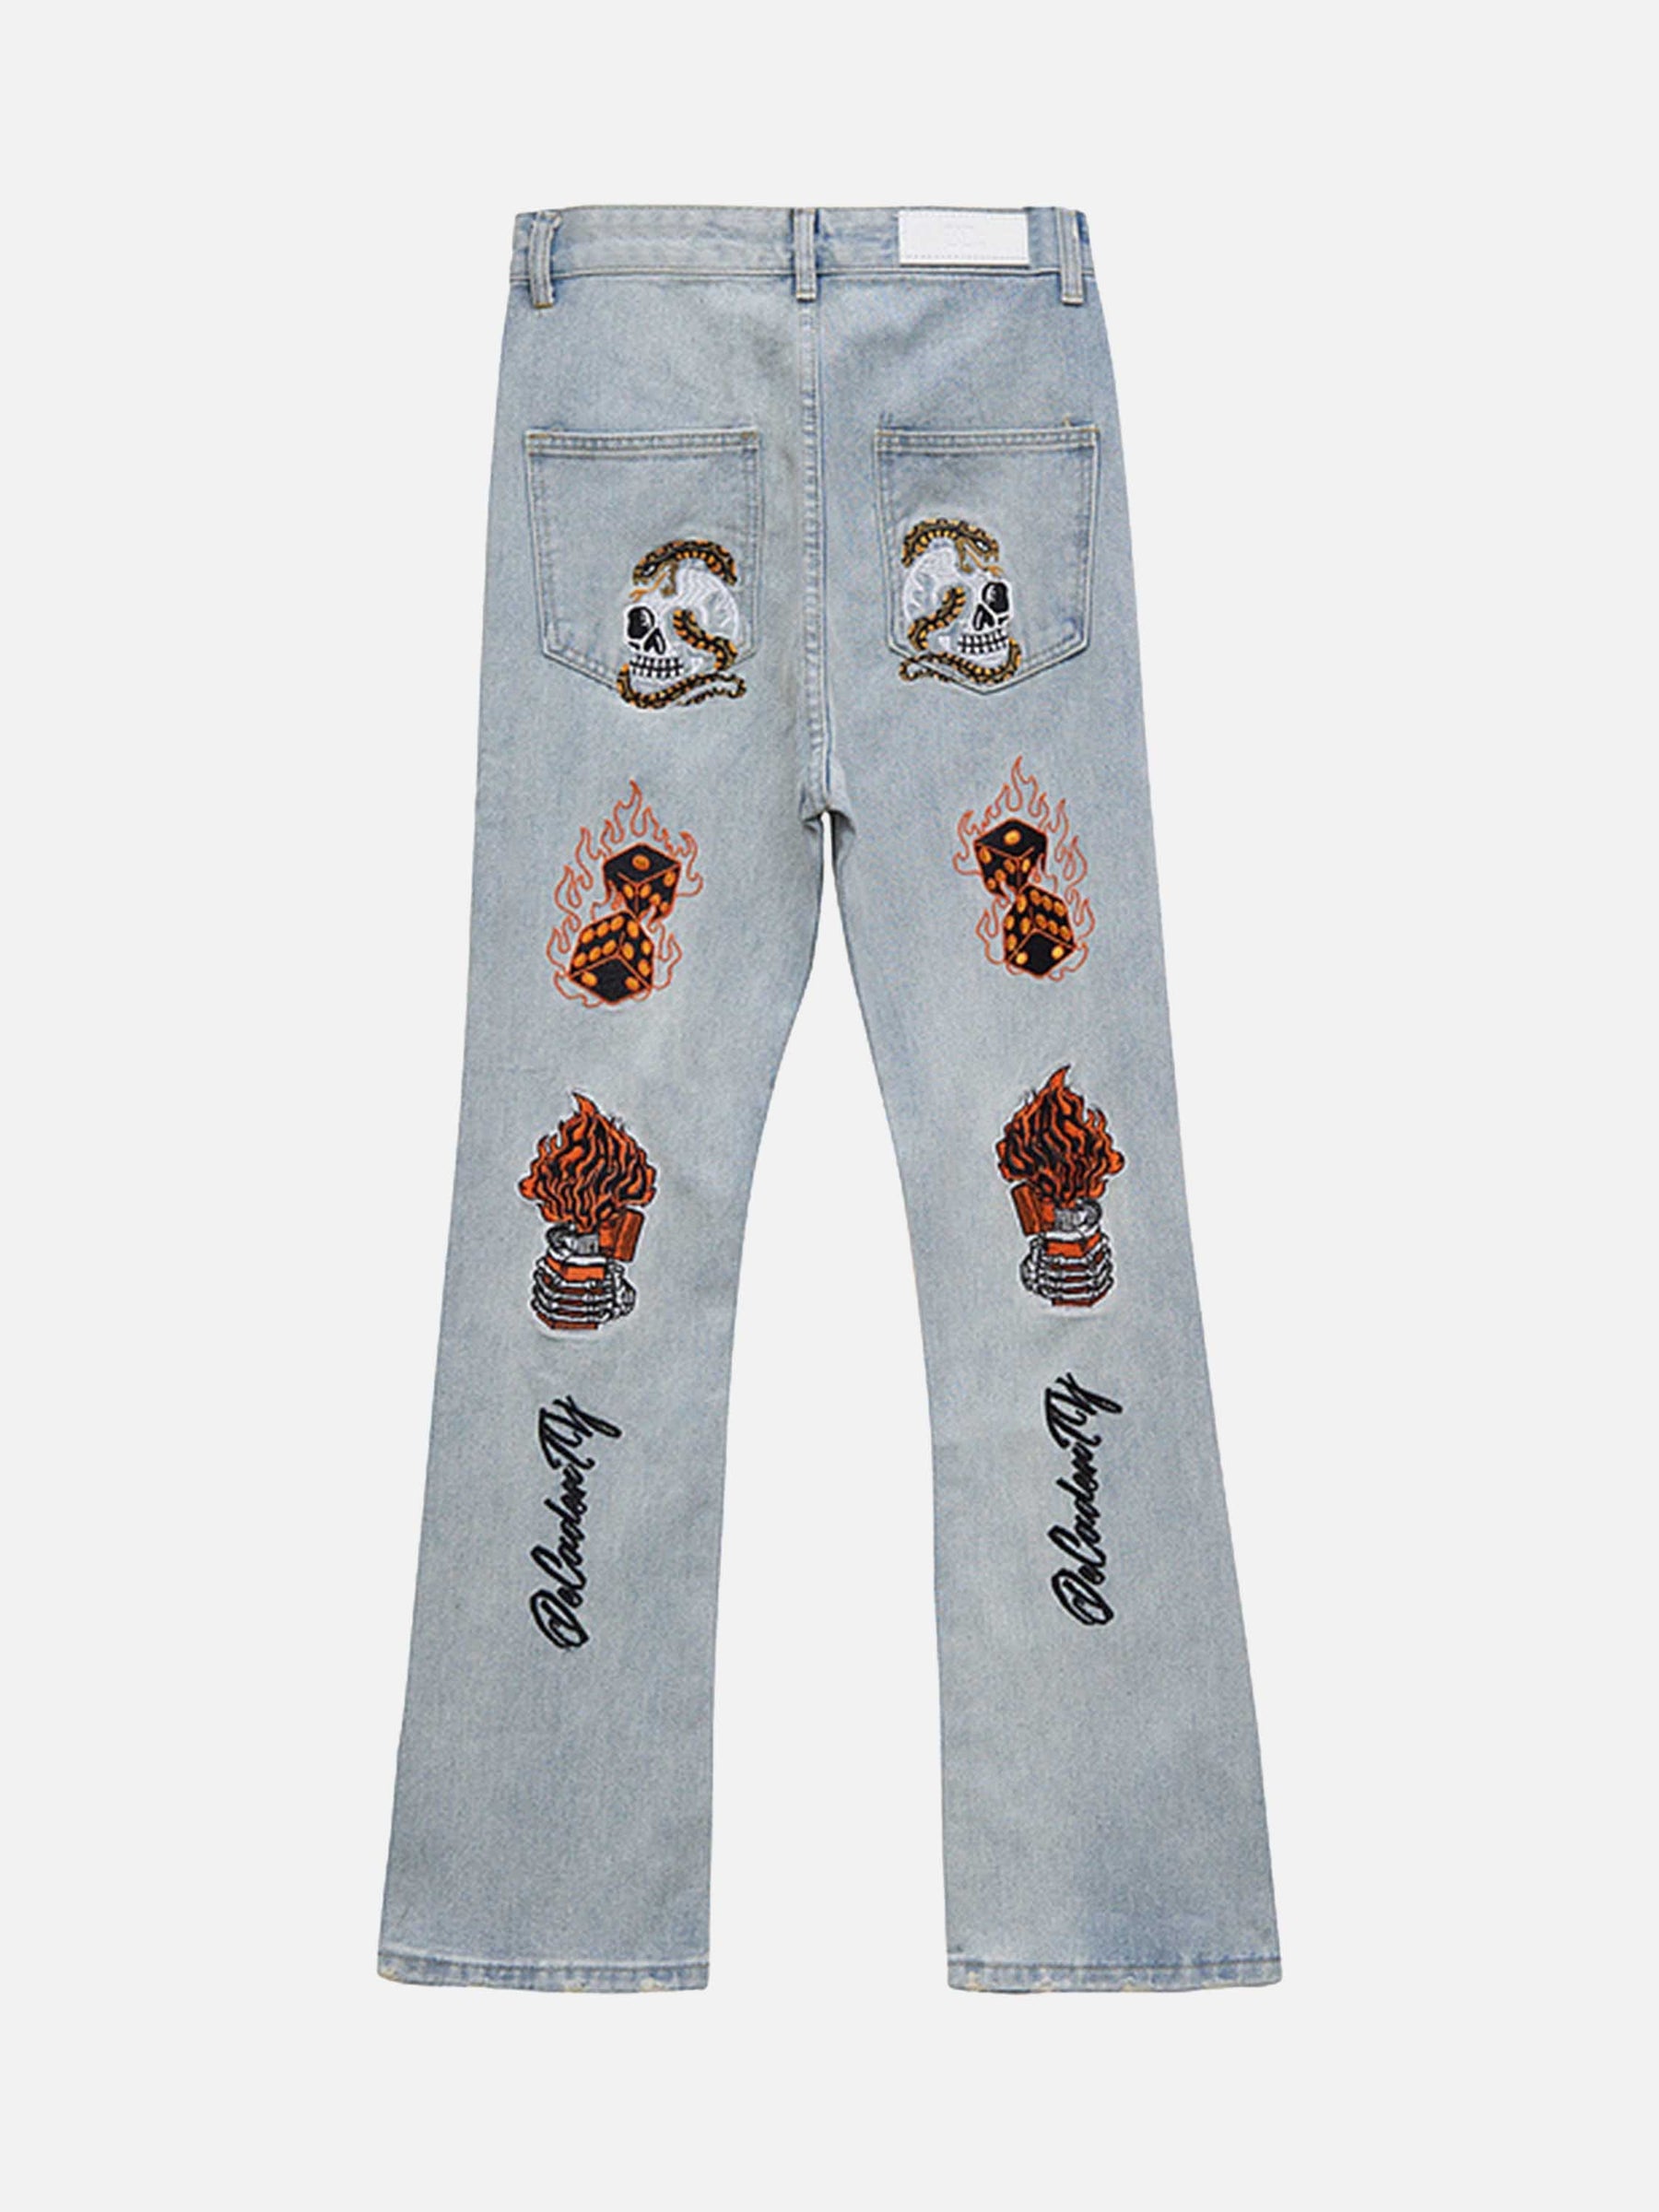 LUXENFY™ - High Street Embroidery Retro Jeans luxenfy.com